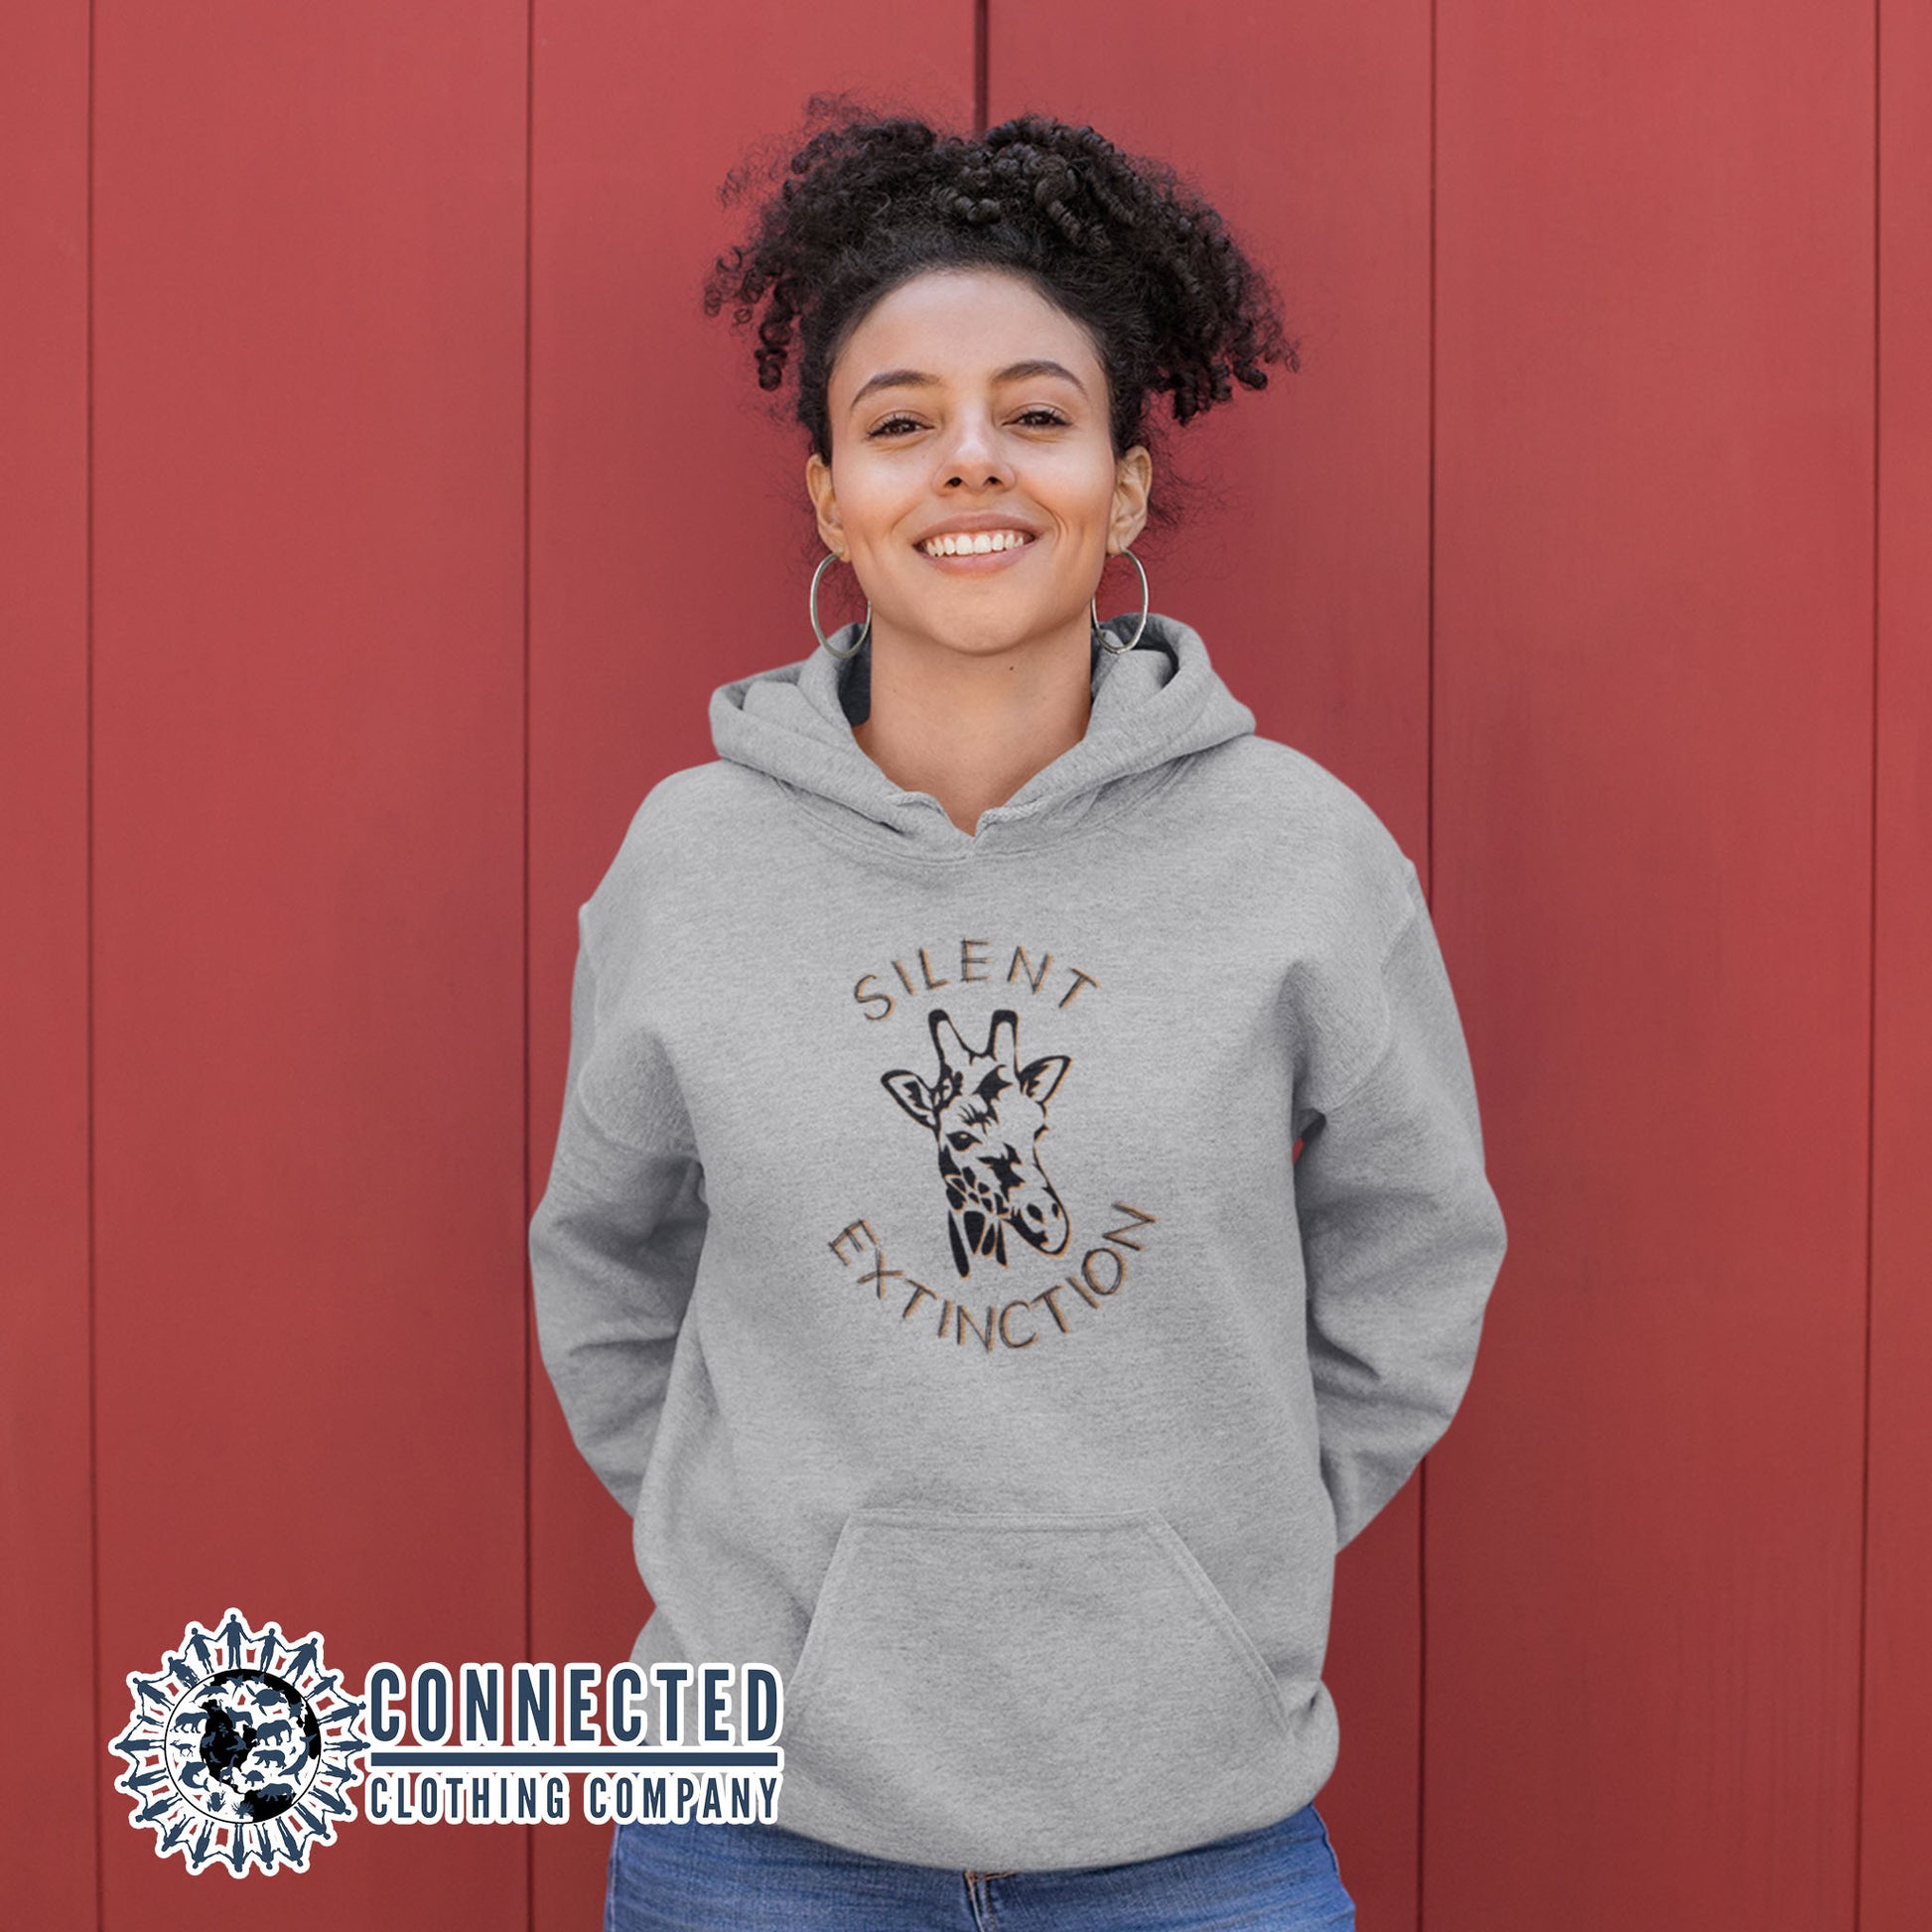 Model wearing Carbon Grey Giraffe Silent Extinction Unisex Hoodie - Connected Clothing Company - 10% of profits donated to the Giraffe Conservation Foundation